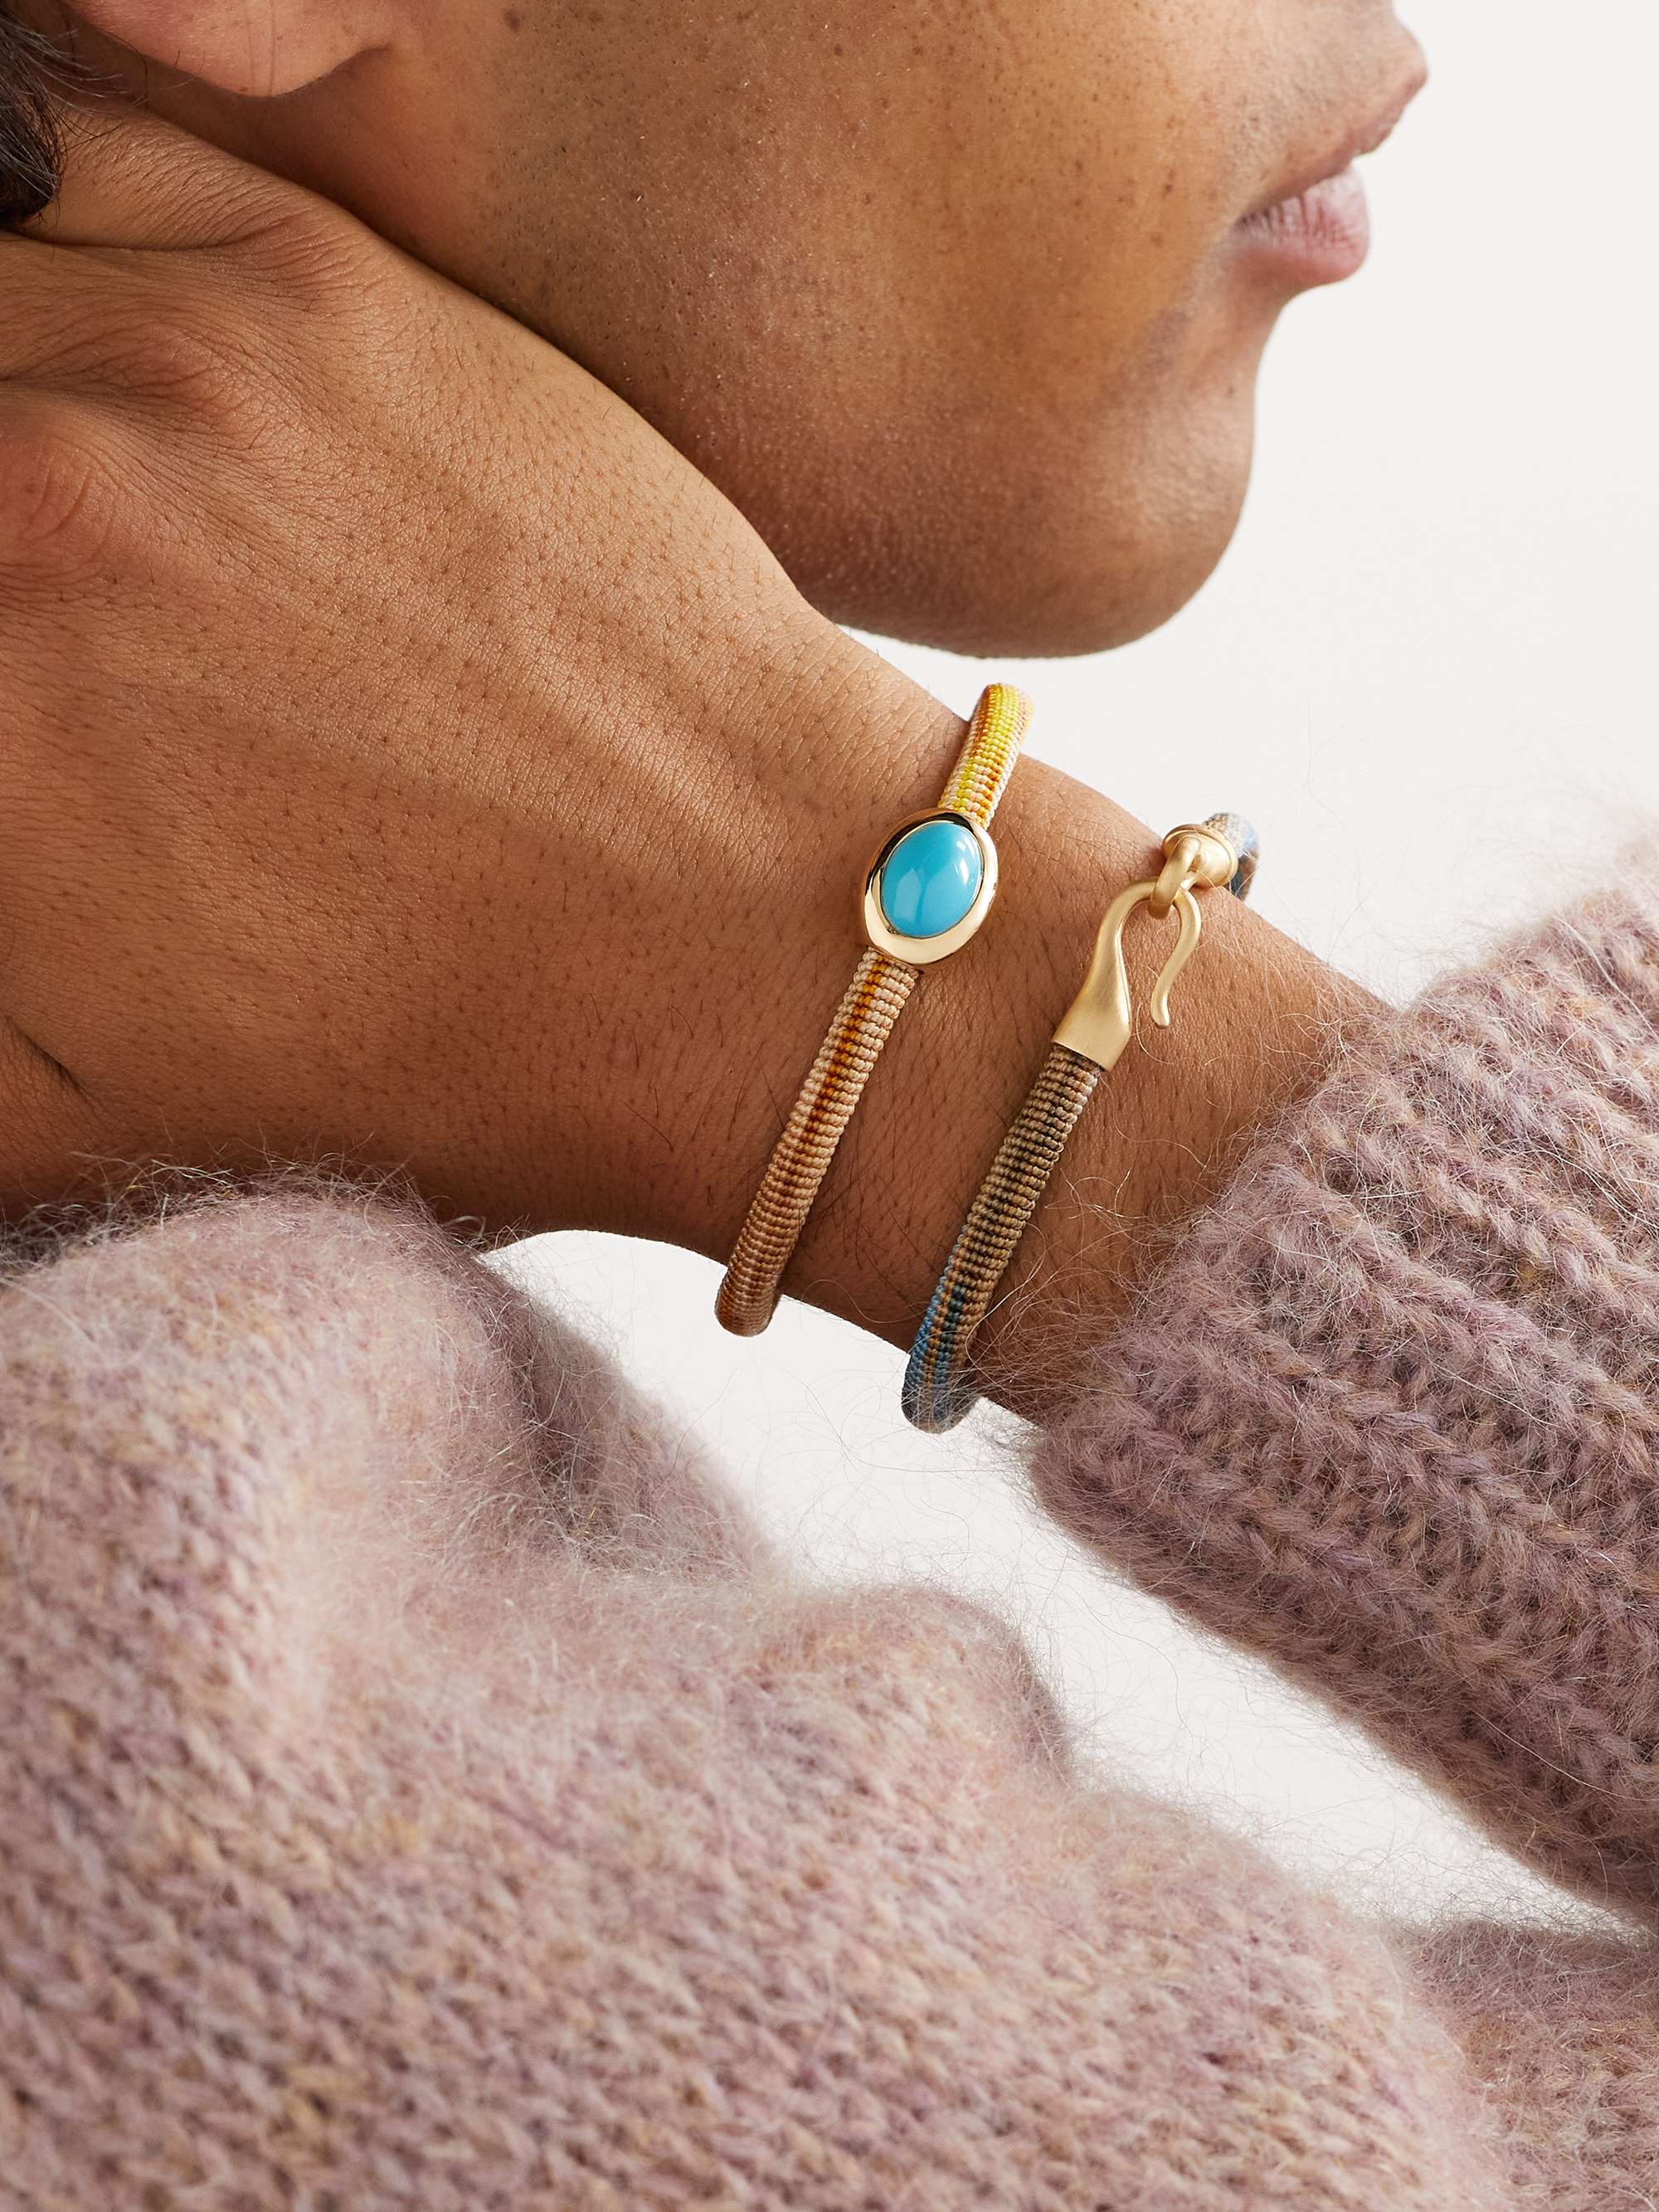 OLE LYNGGAARD COPENHAGEN Life Gold, Turquoise and Cord Bracelet